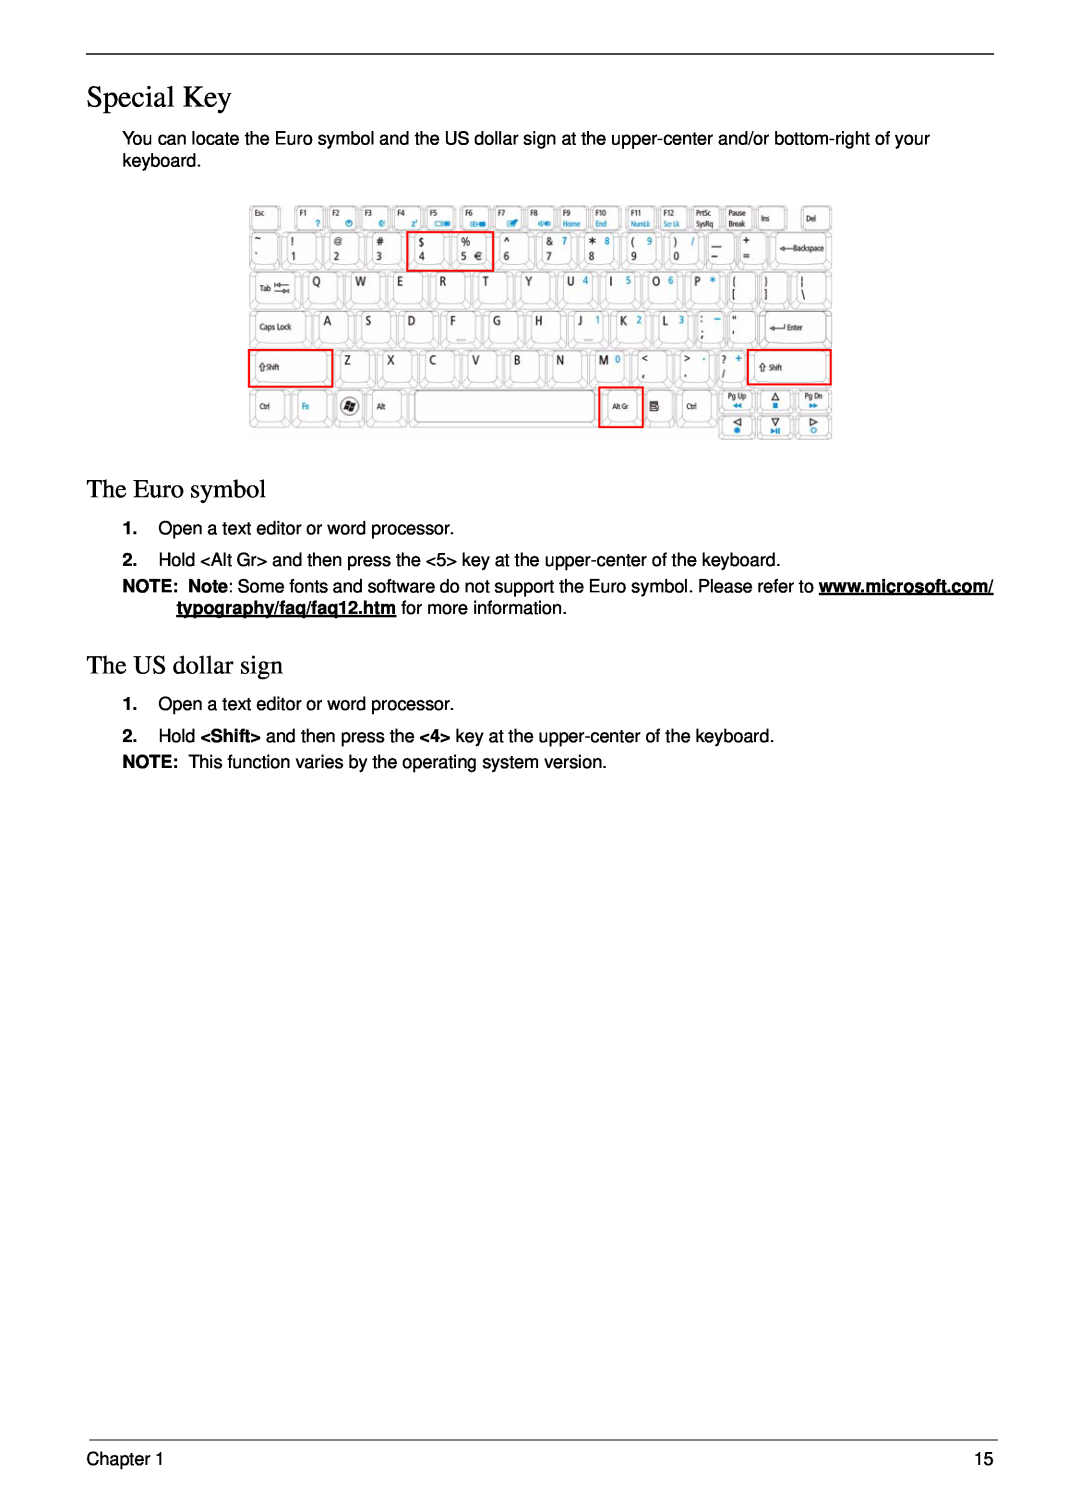 Acer 5530G manual Special Key, The Euro symbol, The US dollar sign 